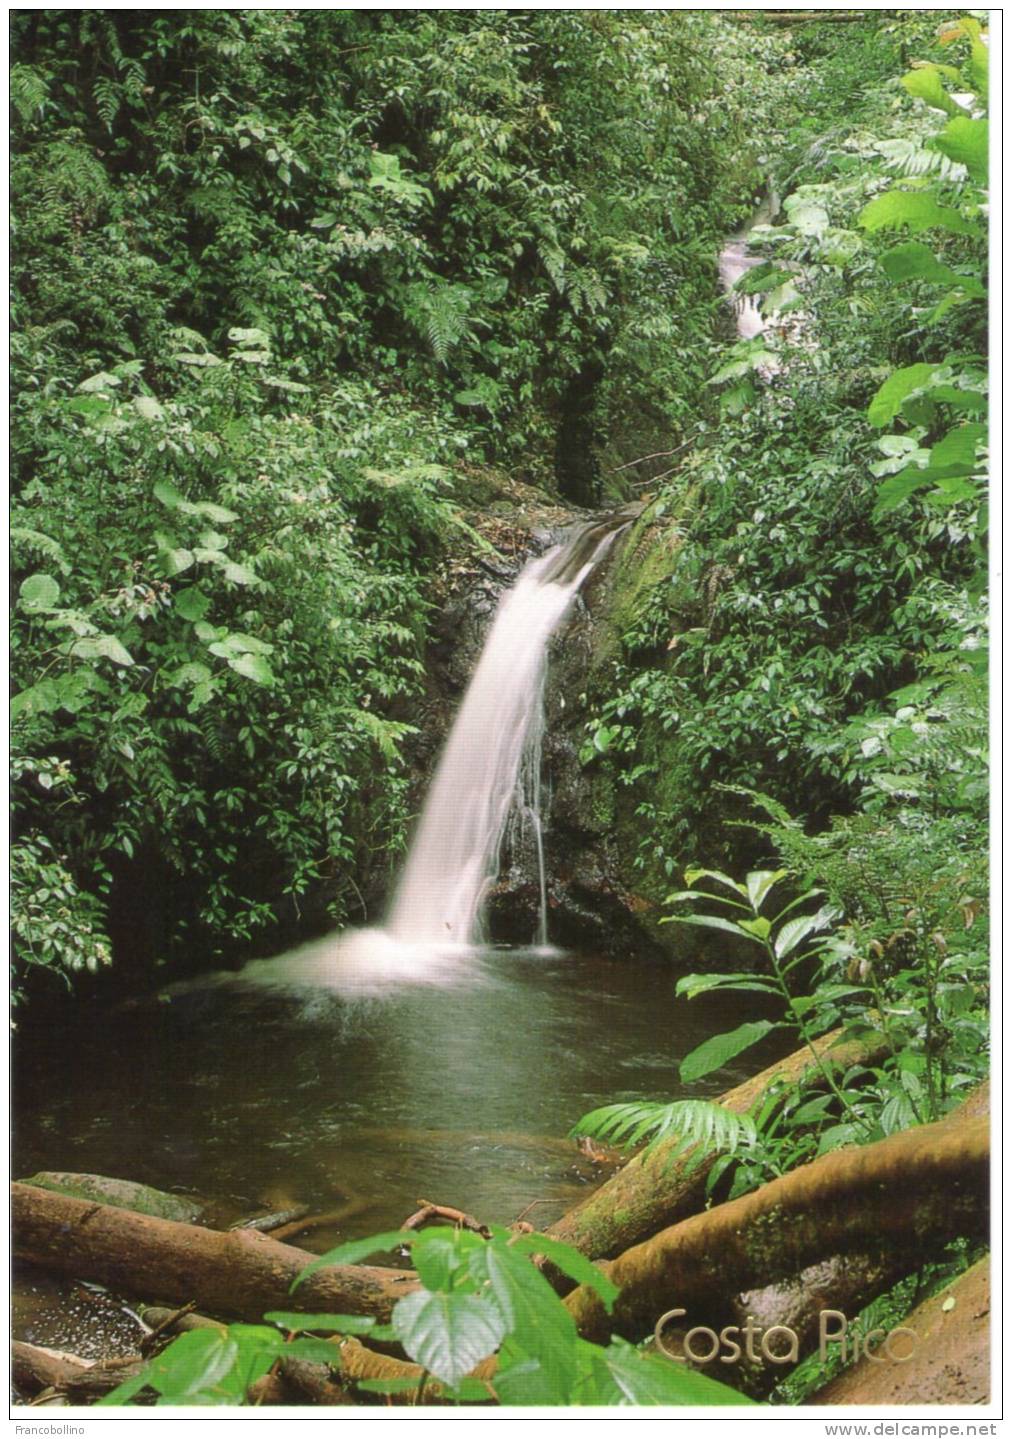 COSTA RICA - THE MONTEVERDE CLOUD FOREST RESERVE / WATERFALLS - Costa Rica